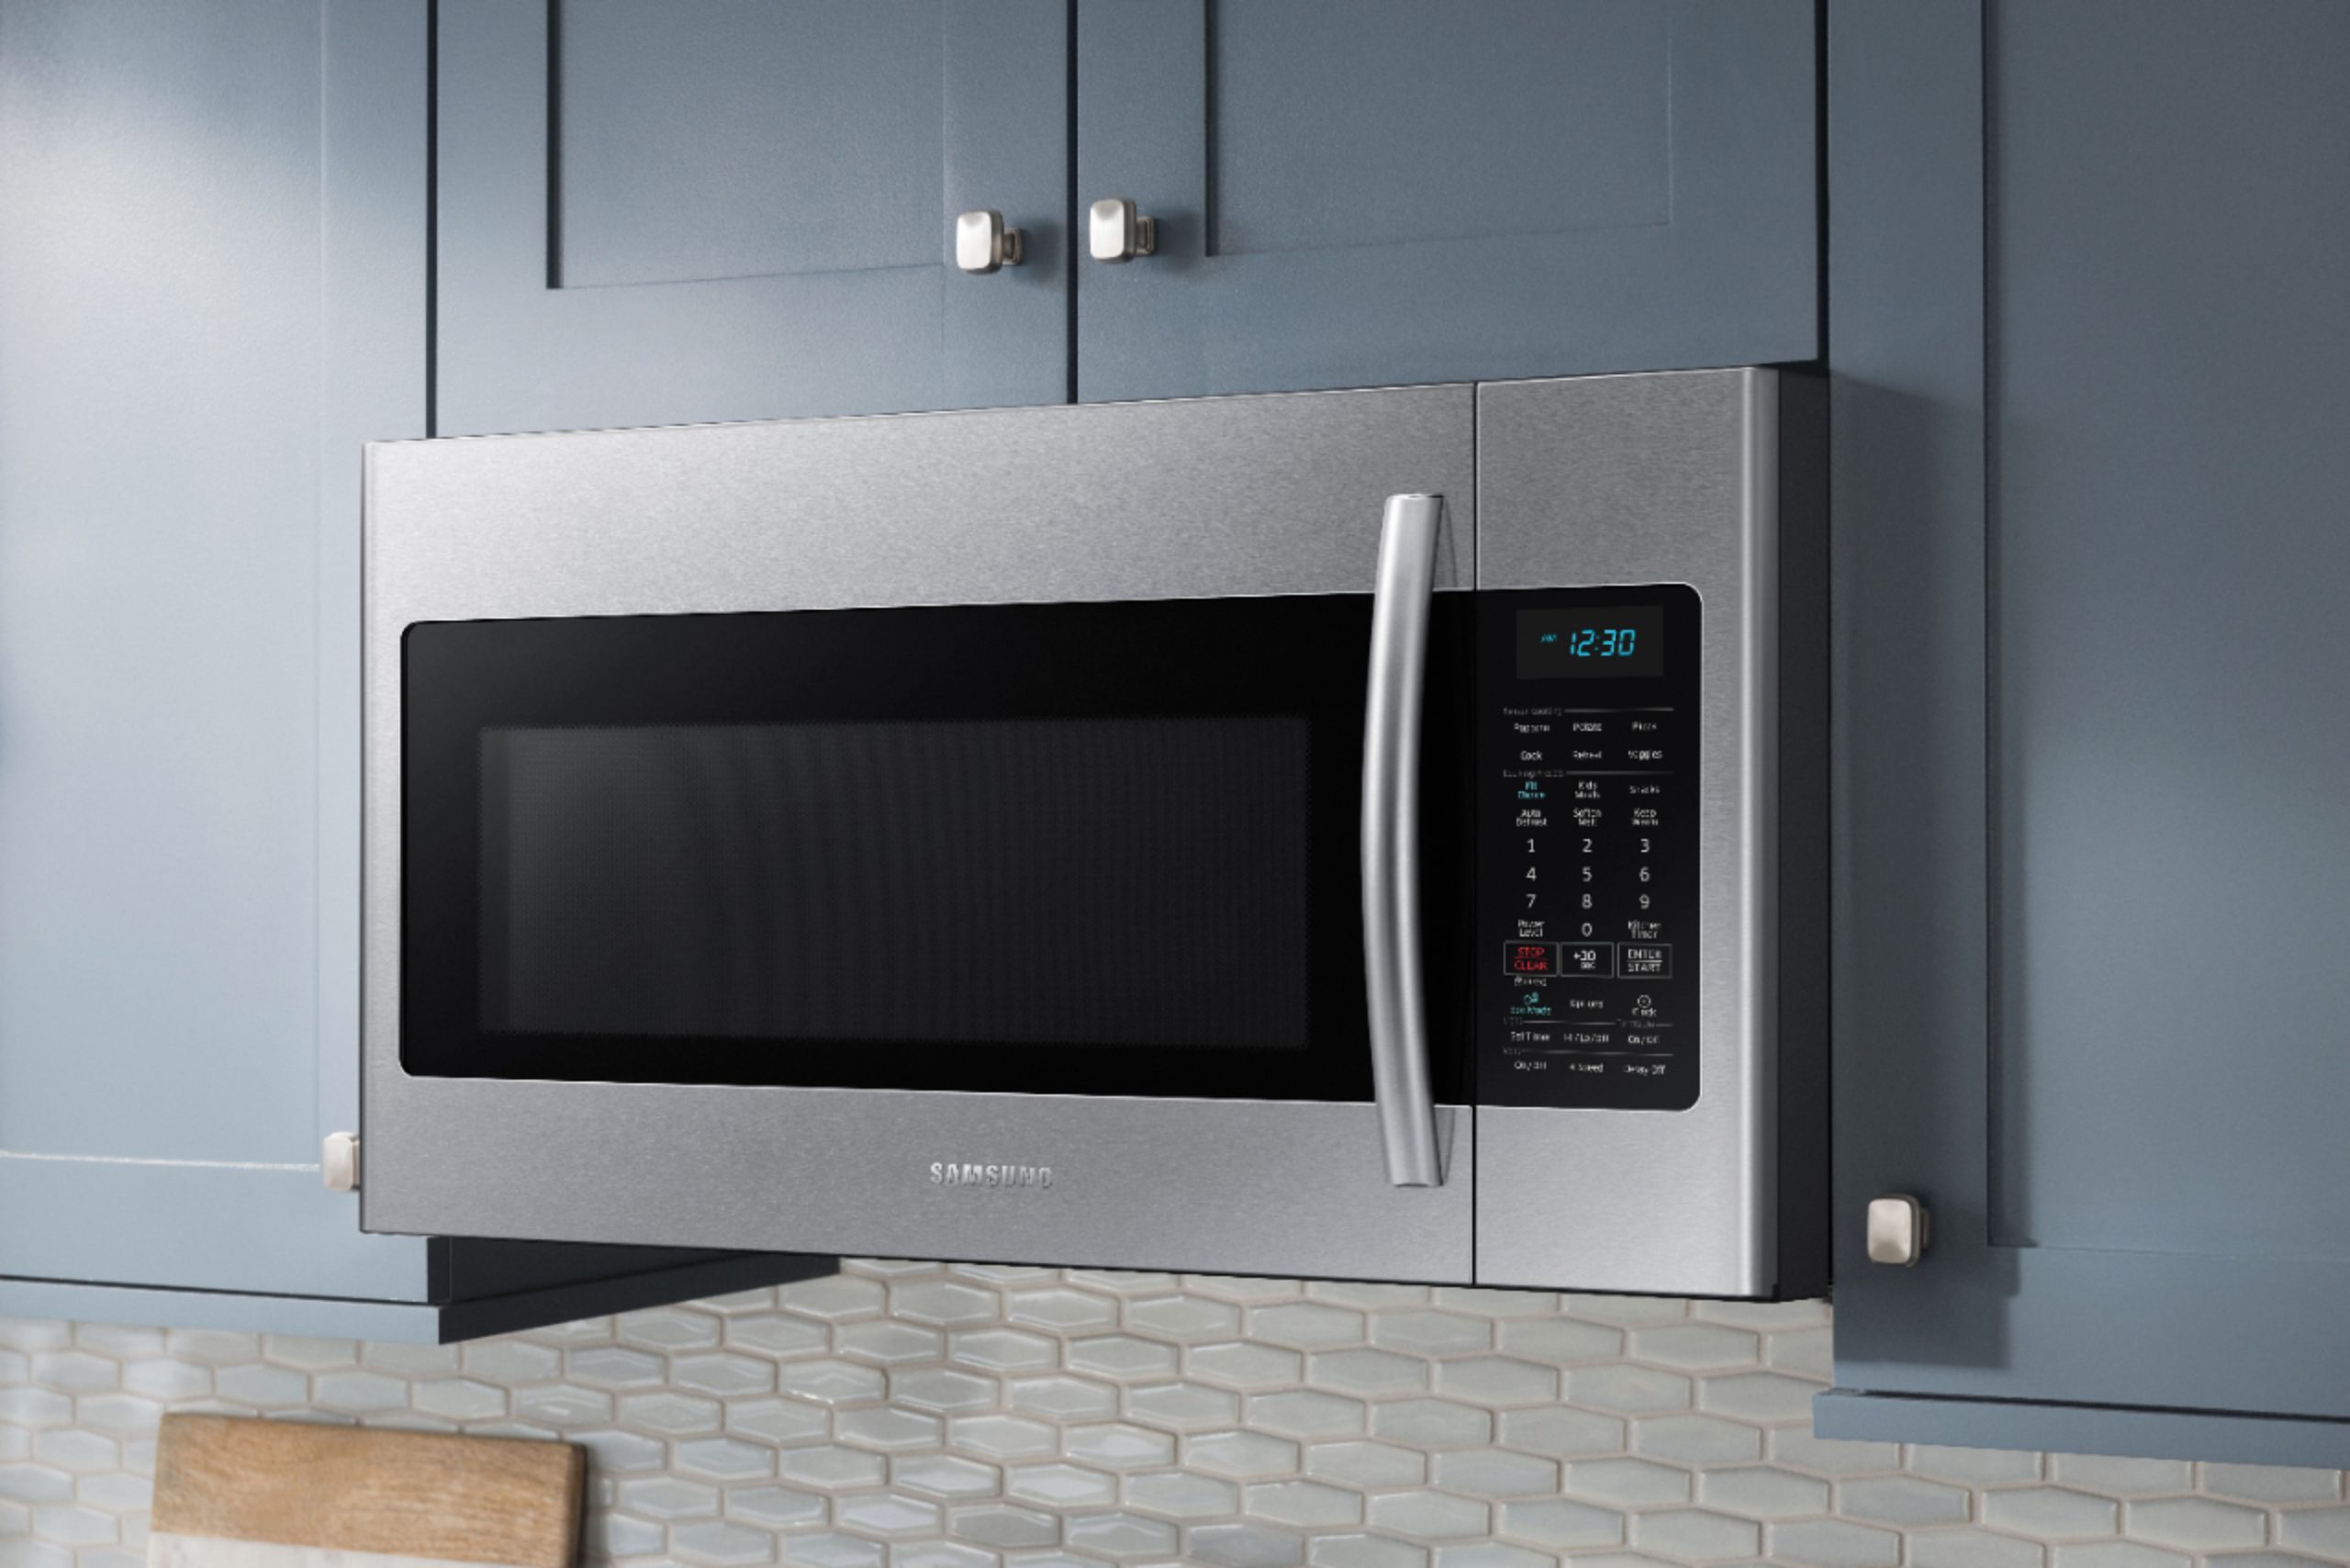 Samsung 18 Cu Ft Over The Range Fingerprint Resistant Microwave With Sensor Cooking Stainless Steel Fingerprint Resistant Stainless Steel with proportions 7360 X 4910